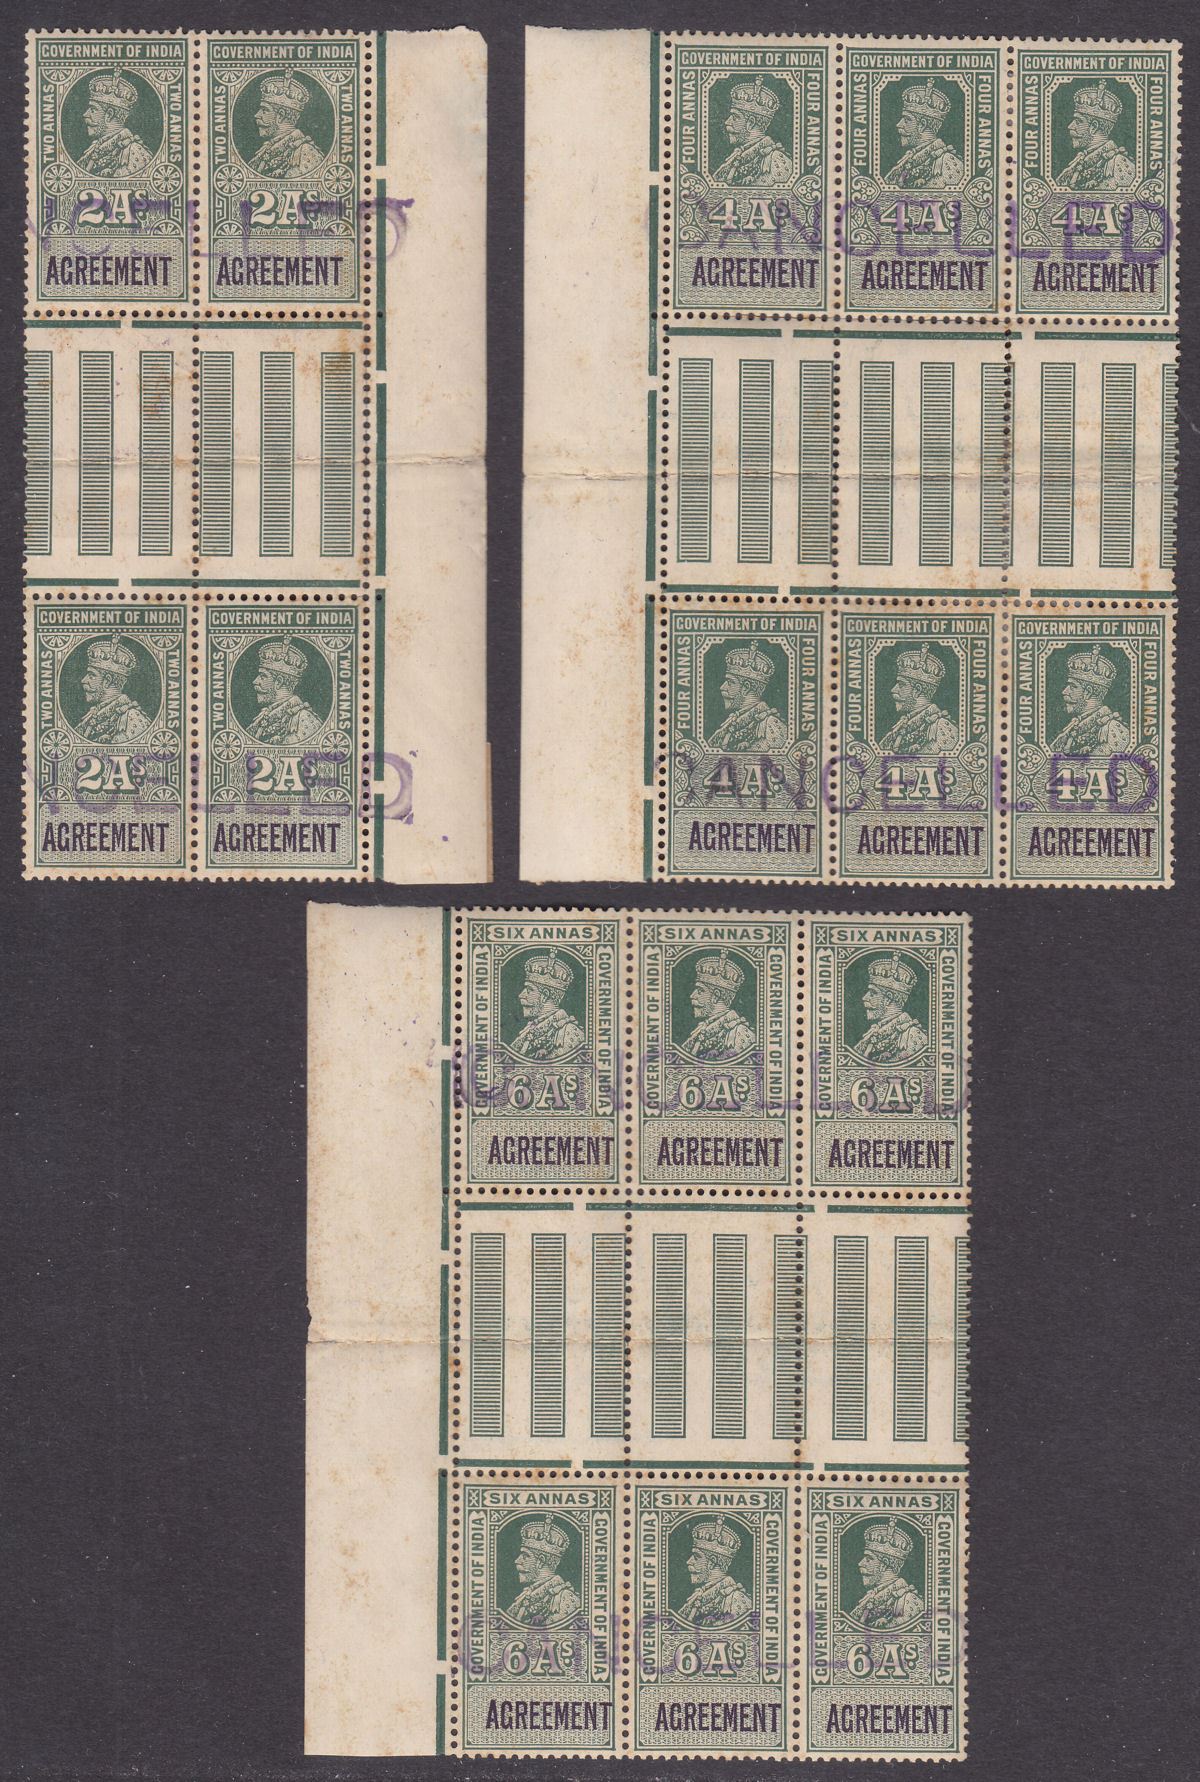 India 1923 KGV Revenue Agreement CANCELLED 2a 4a 6a Gutter Blocks - heavy toned